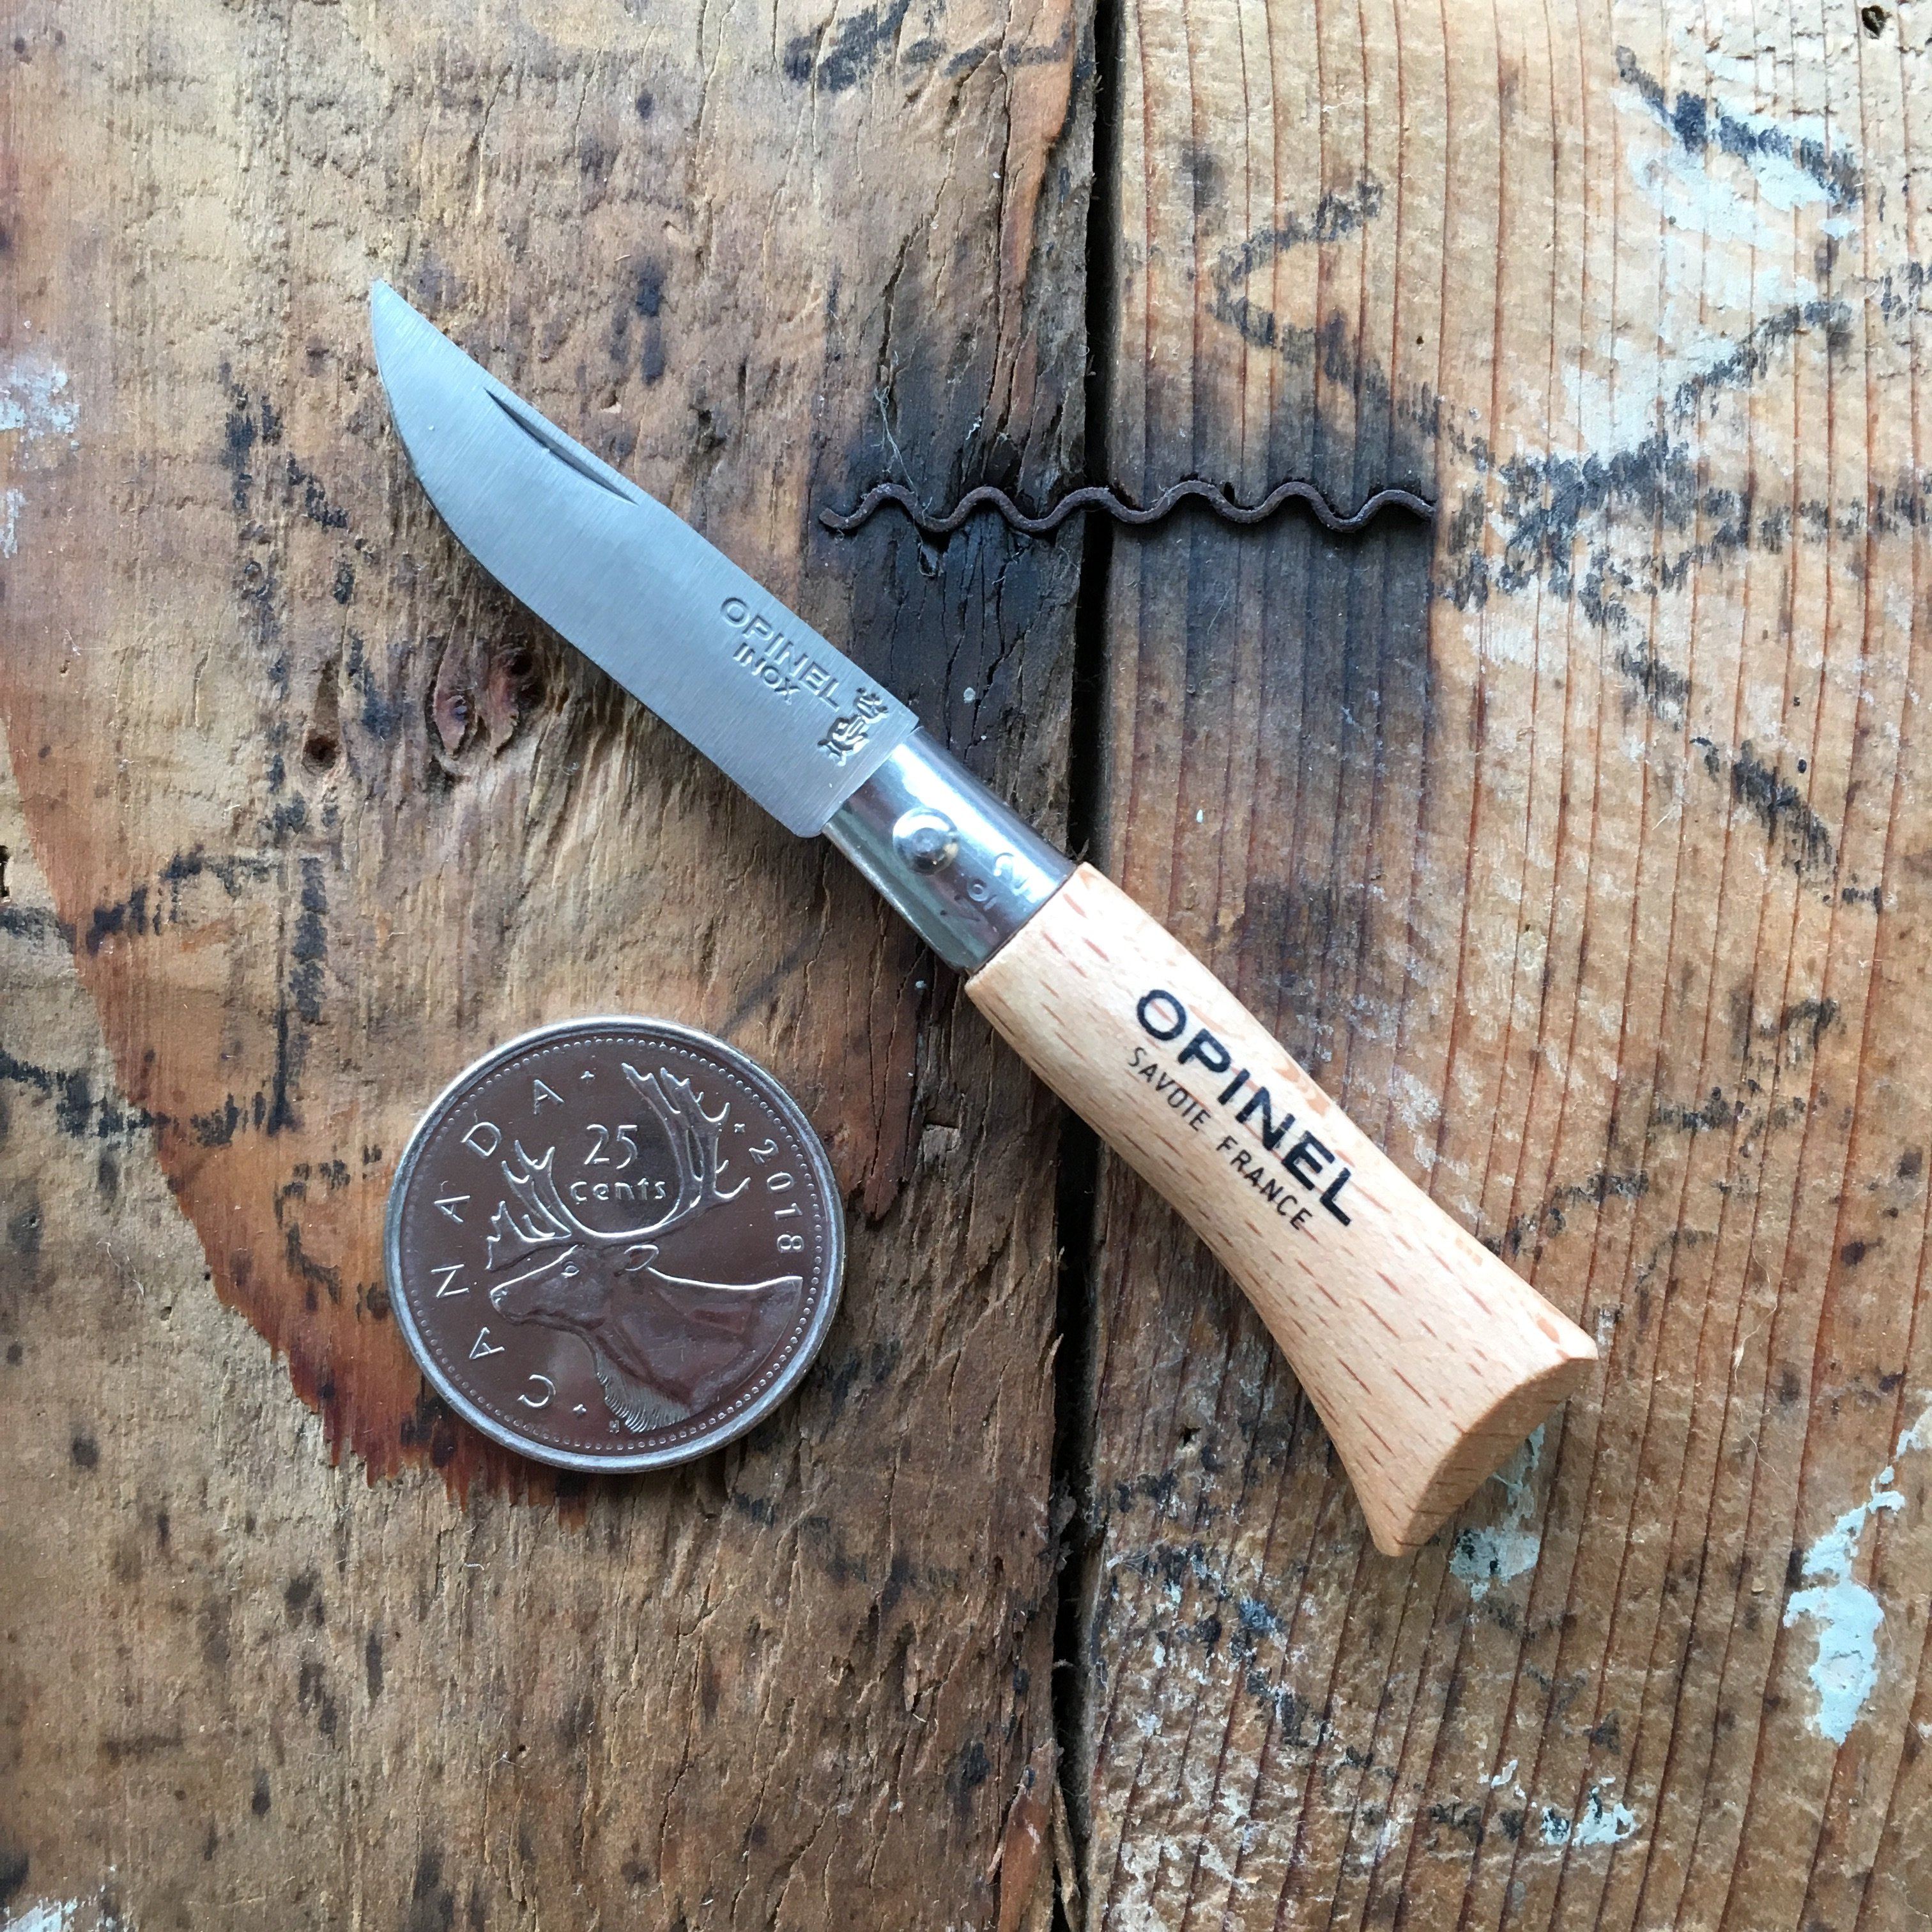 Opinel Inox No.02 Folding Knife from Opinel